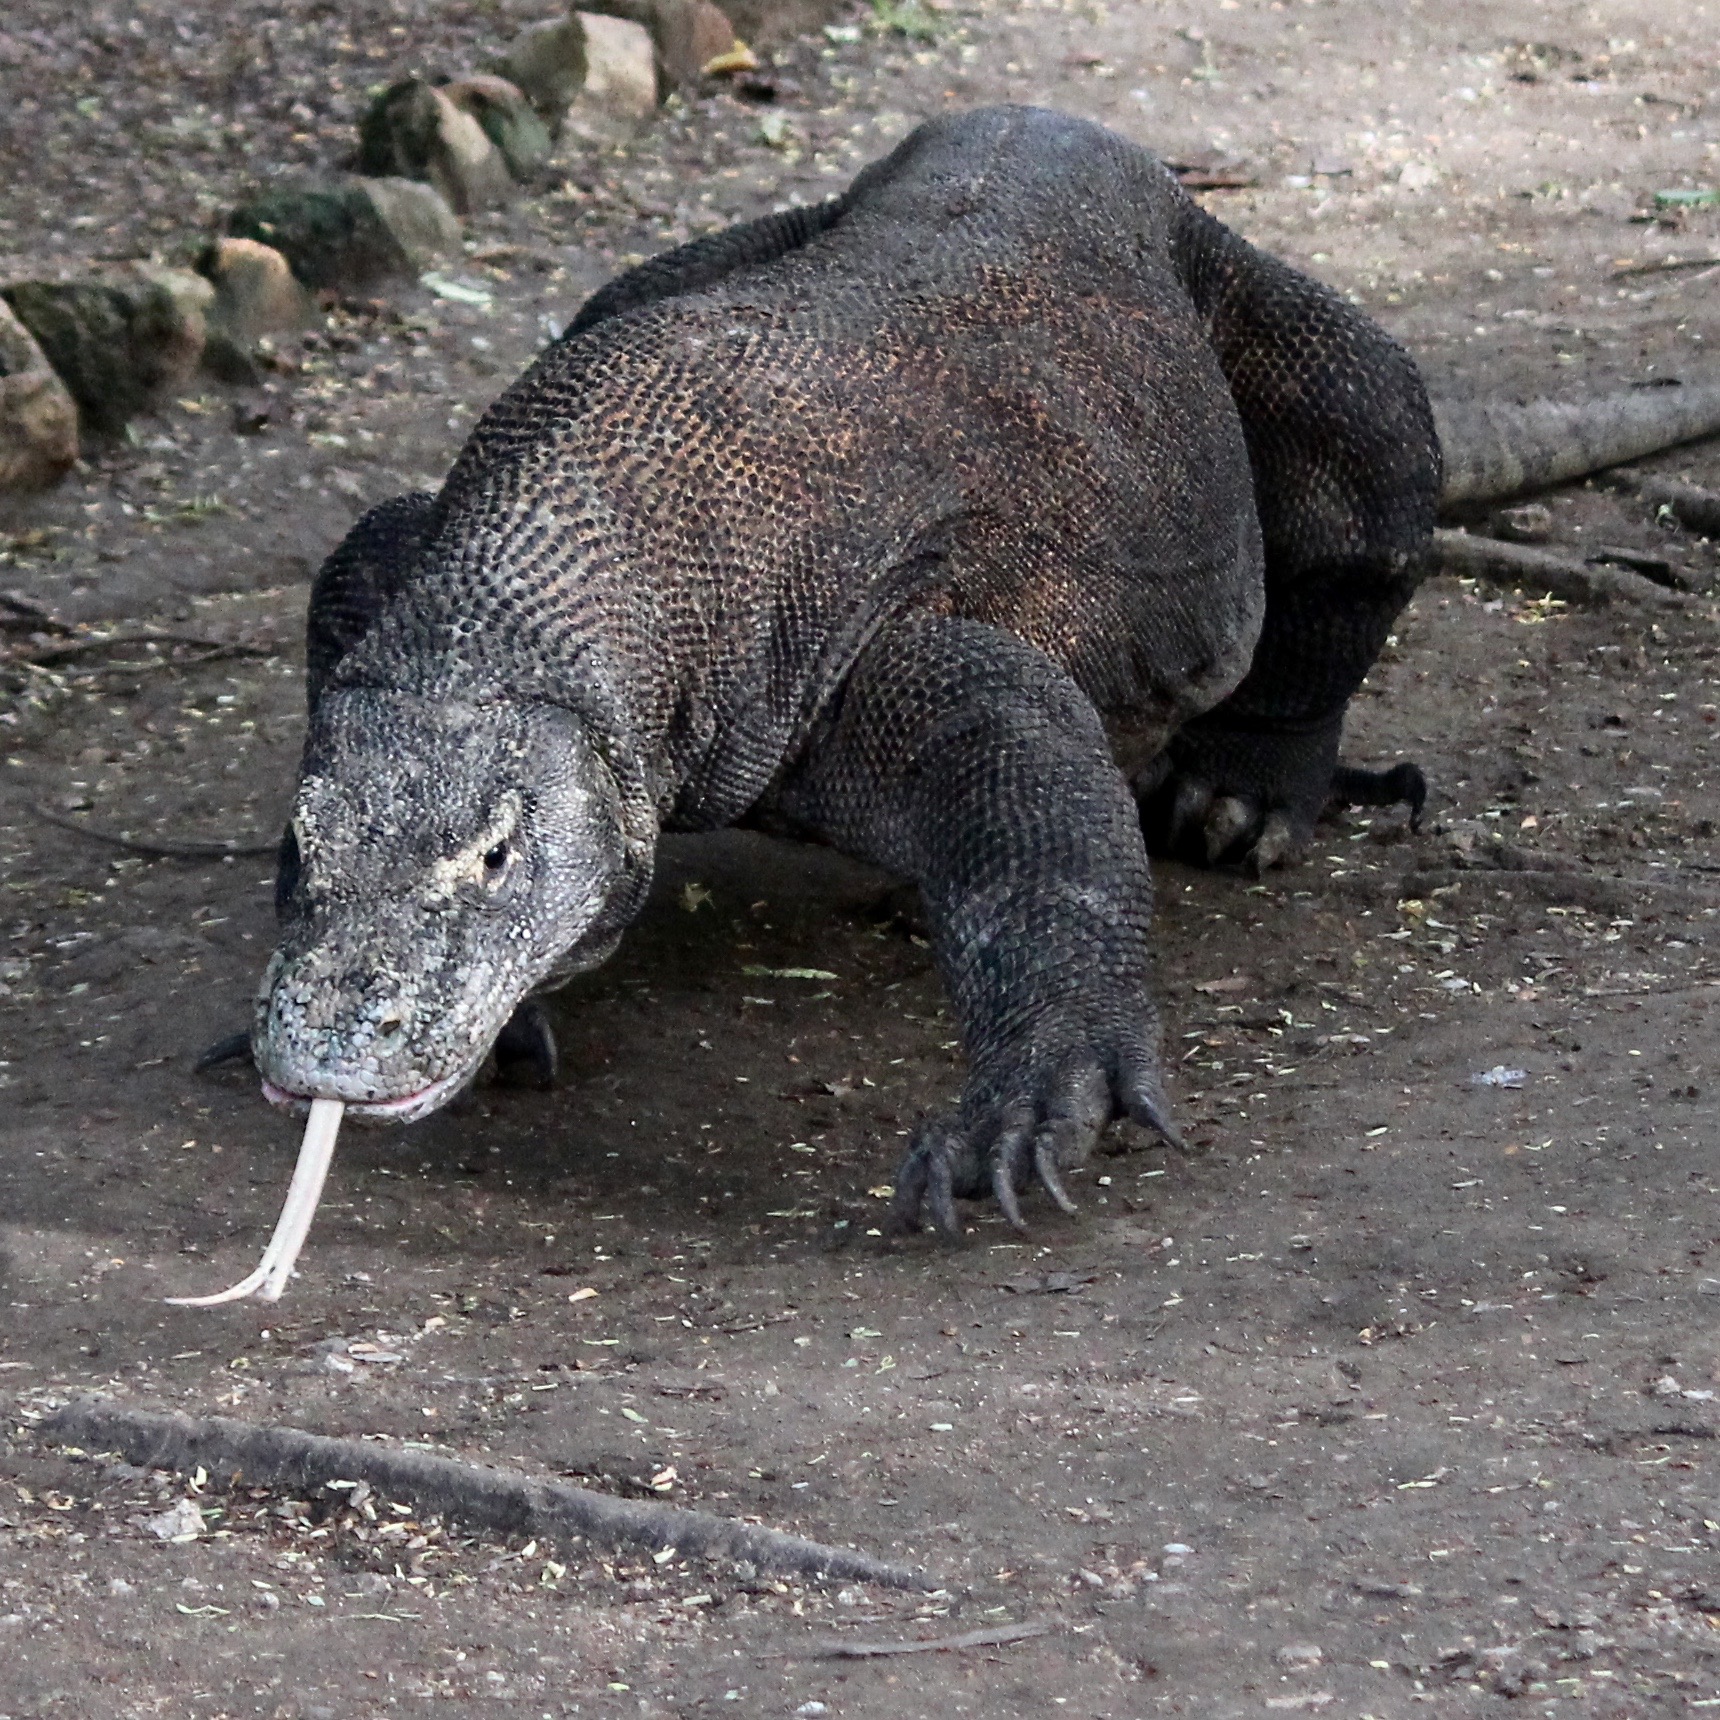 Komodo dragon on the prowl sticking out his tongue